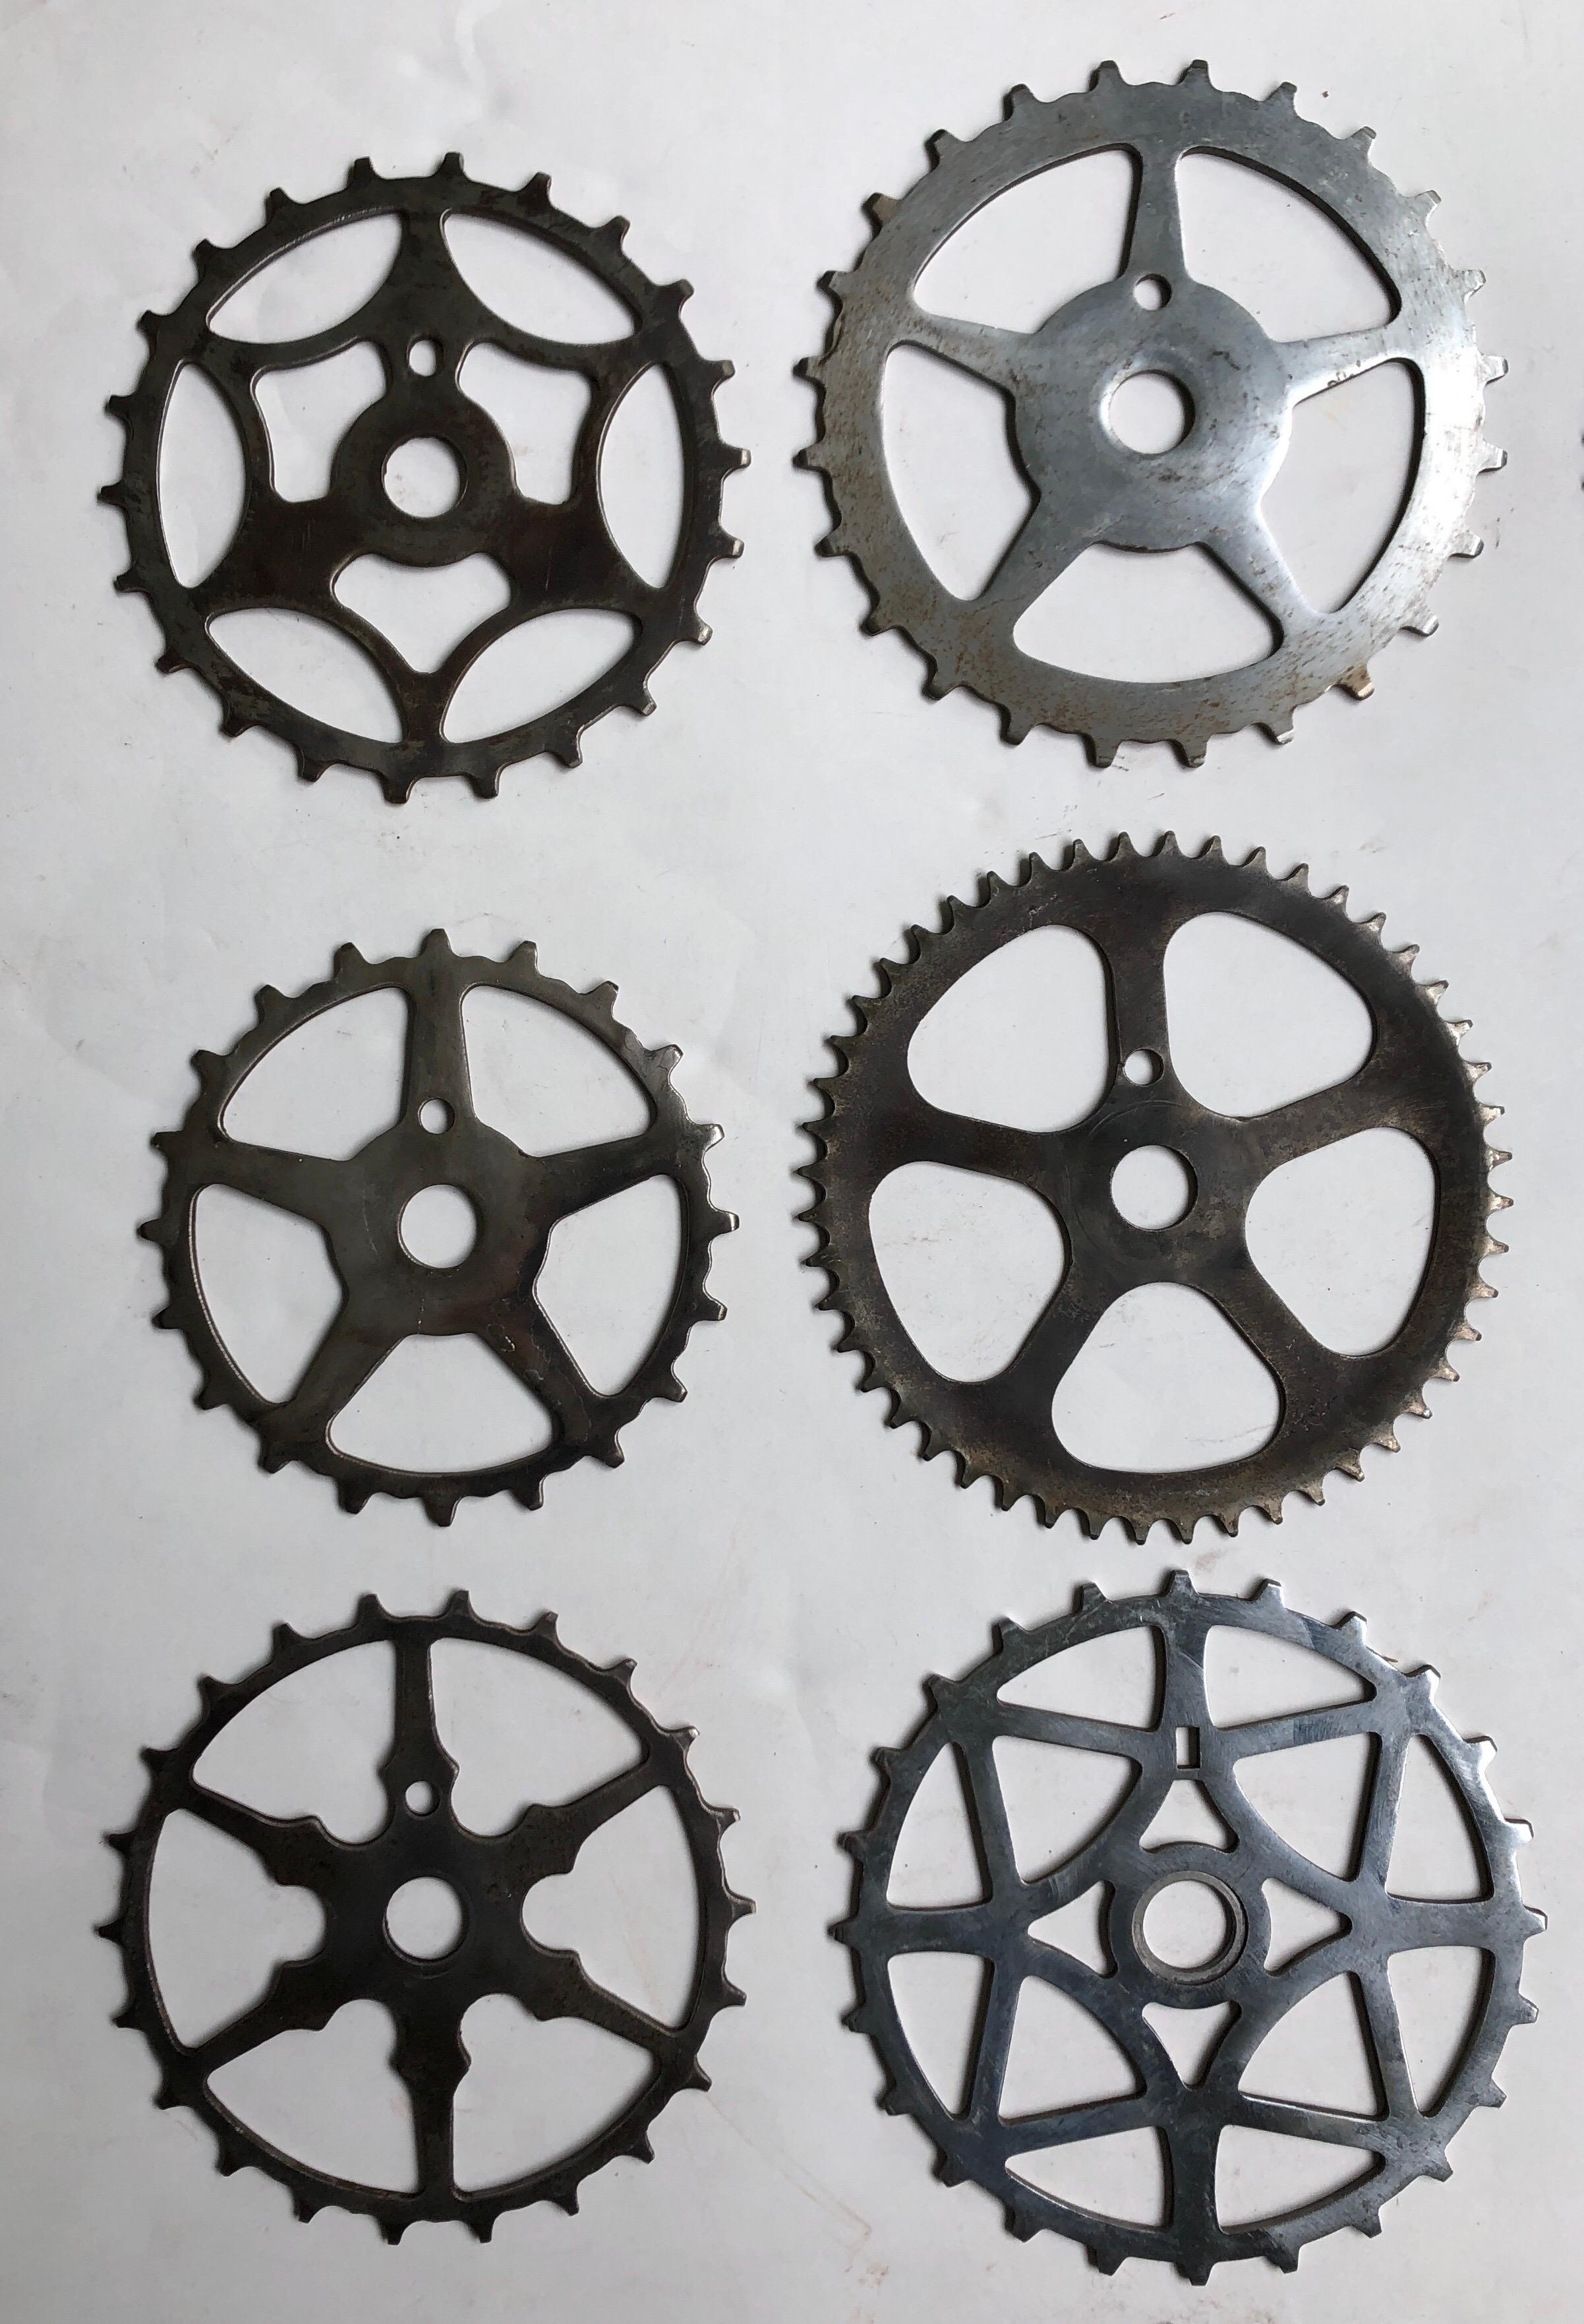 20th Century Antique Chrome-Plated Steel Bicycle Sprocket Display, Mid-Century Modern